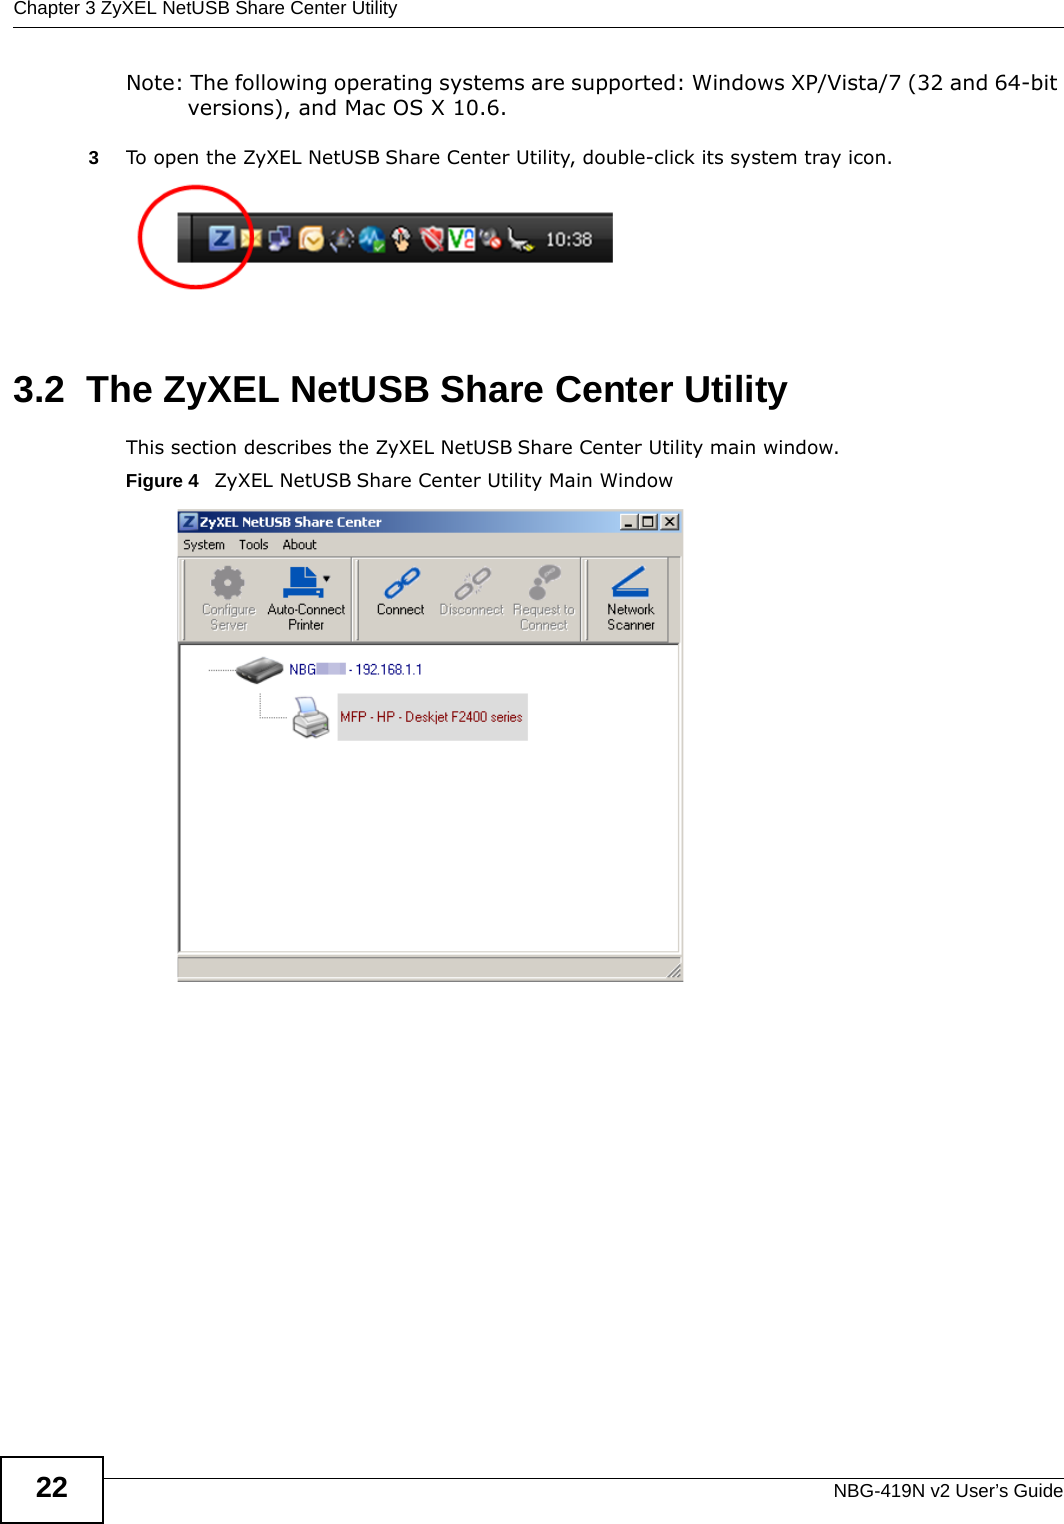 Chapter 3 ZyXEL NetUSB Share Center UtilityNBG-419N v2 User’s Guide22Note: The following operating systems are supported: Windows XP/Vista/7 (32 and 64-bit versions), and Mac OS X 10.6.3To open the ZyXEL NetUSB Share Center Utility, double-click its system tray icon.3.2  The ZyXEL NetUSB Share Center UtilityThis section describes the ZyXEL NetUSB Share Center Utility main window.Figure 4   ZyXEL NetUSB Share Center Utility Main Window